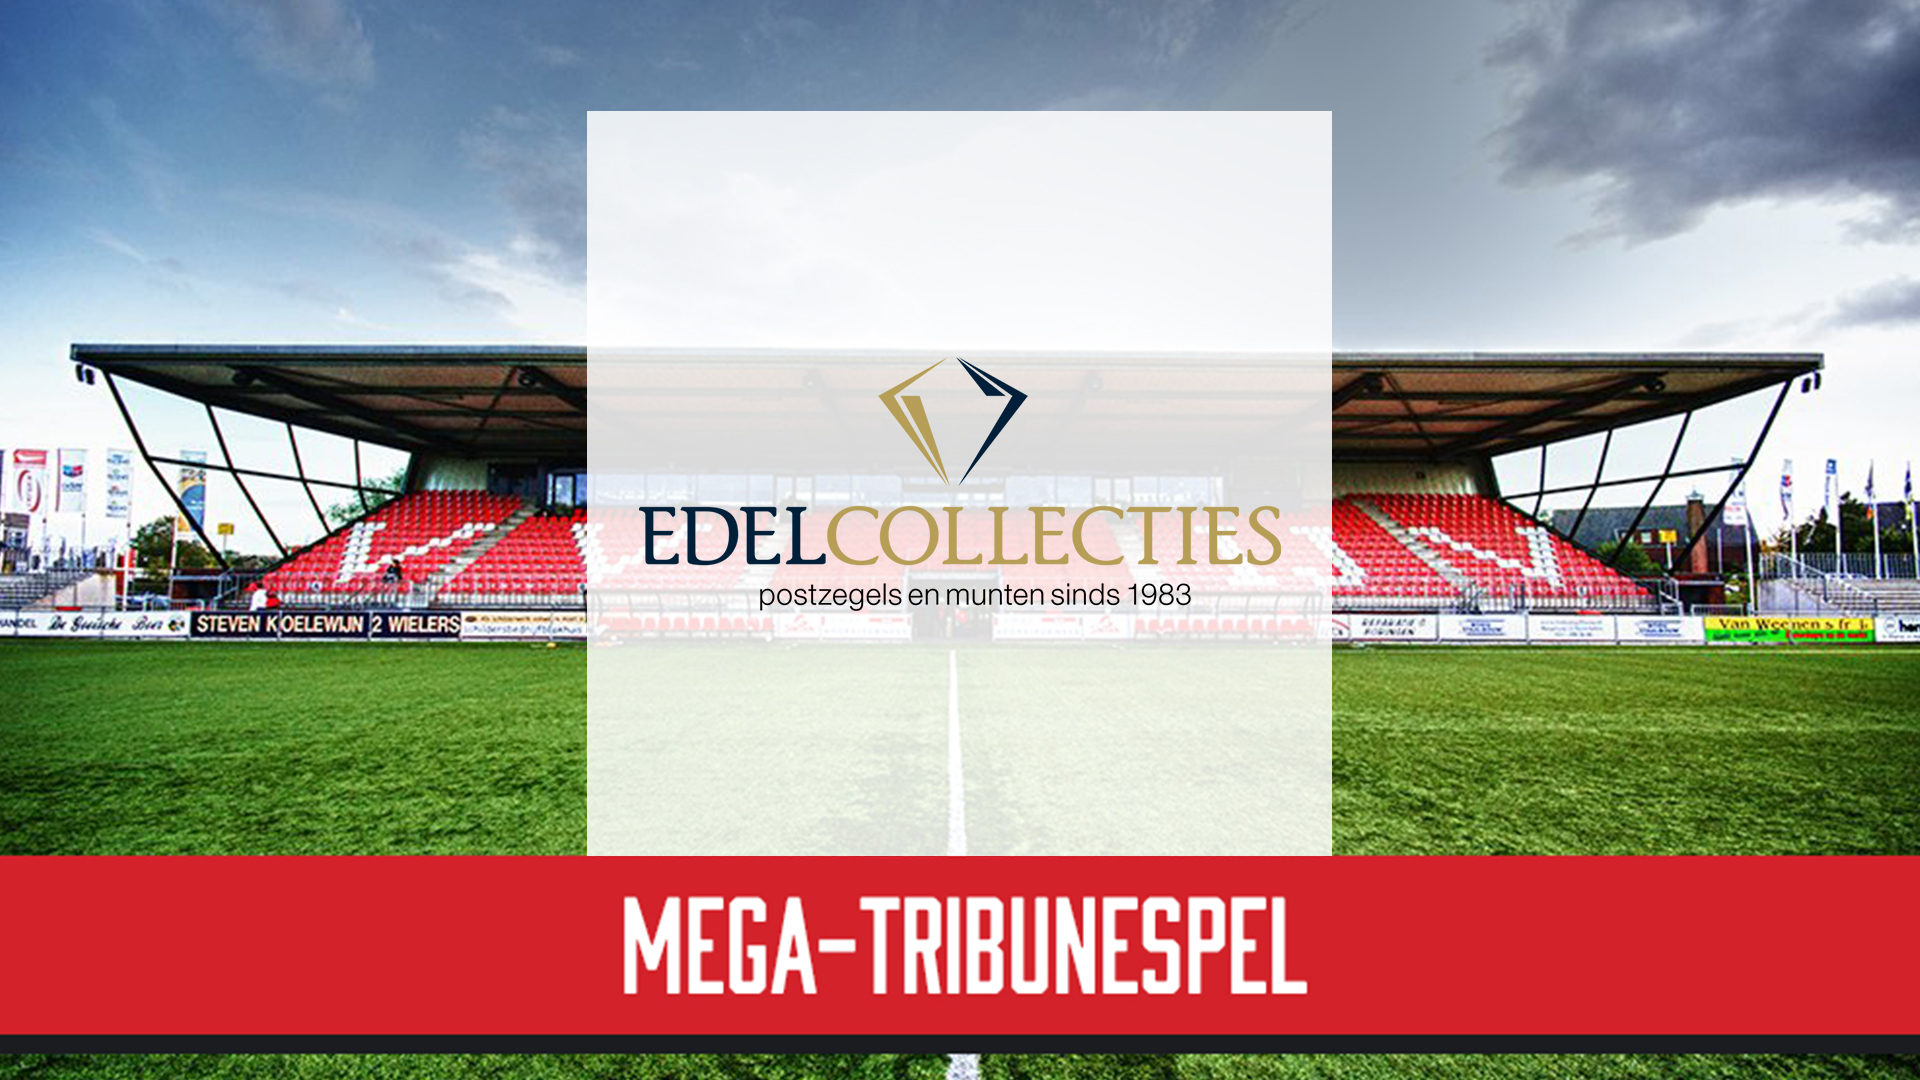 MTS edelcollecties